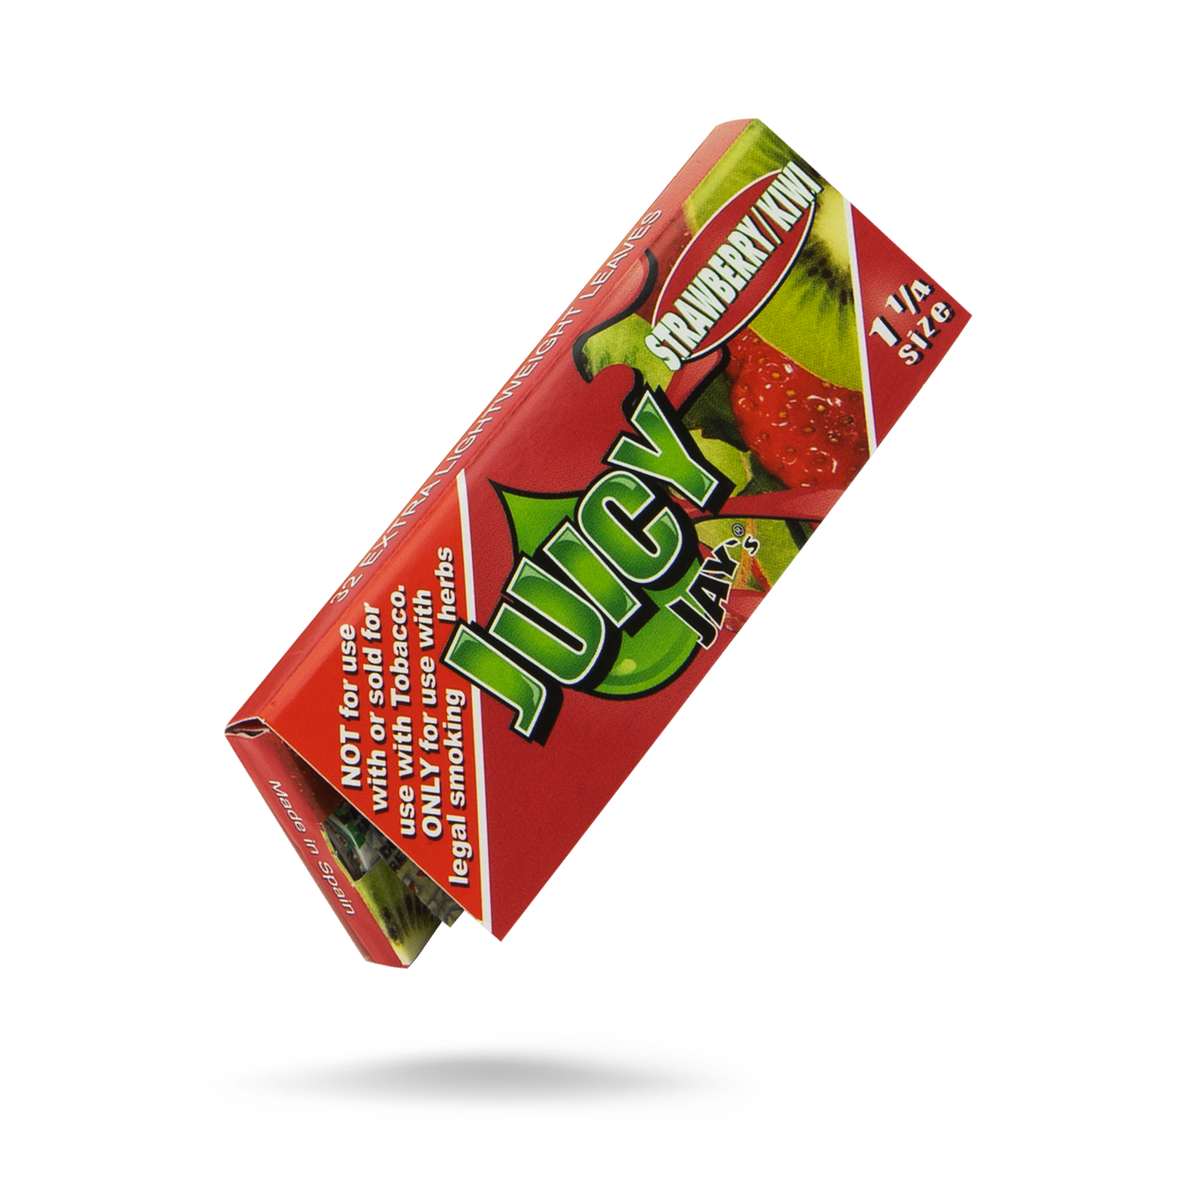 Juicy Jays 1 1/4 Strawberry Kiwi Flavored Hemp Rolling Papers Rolling Papers esd-official